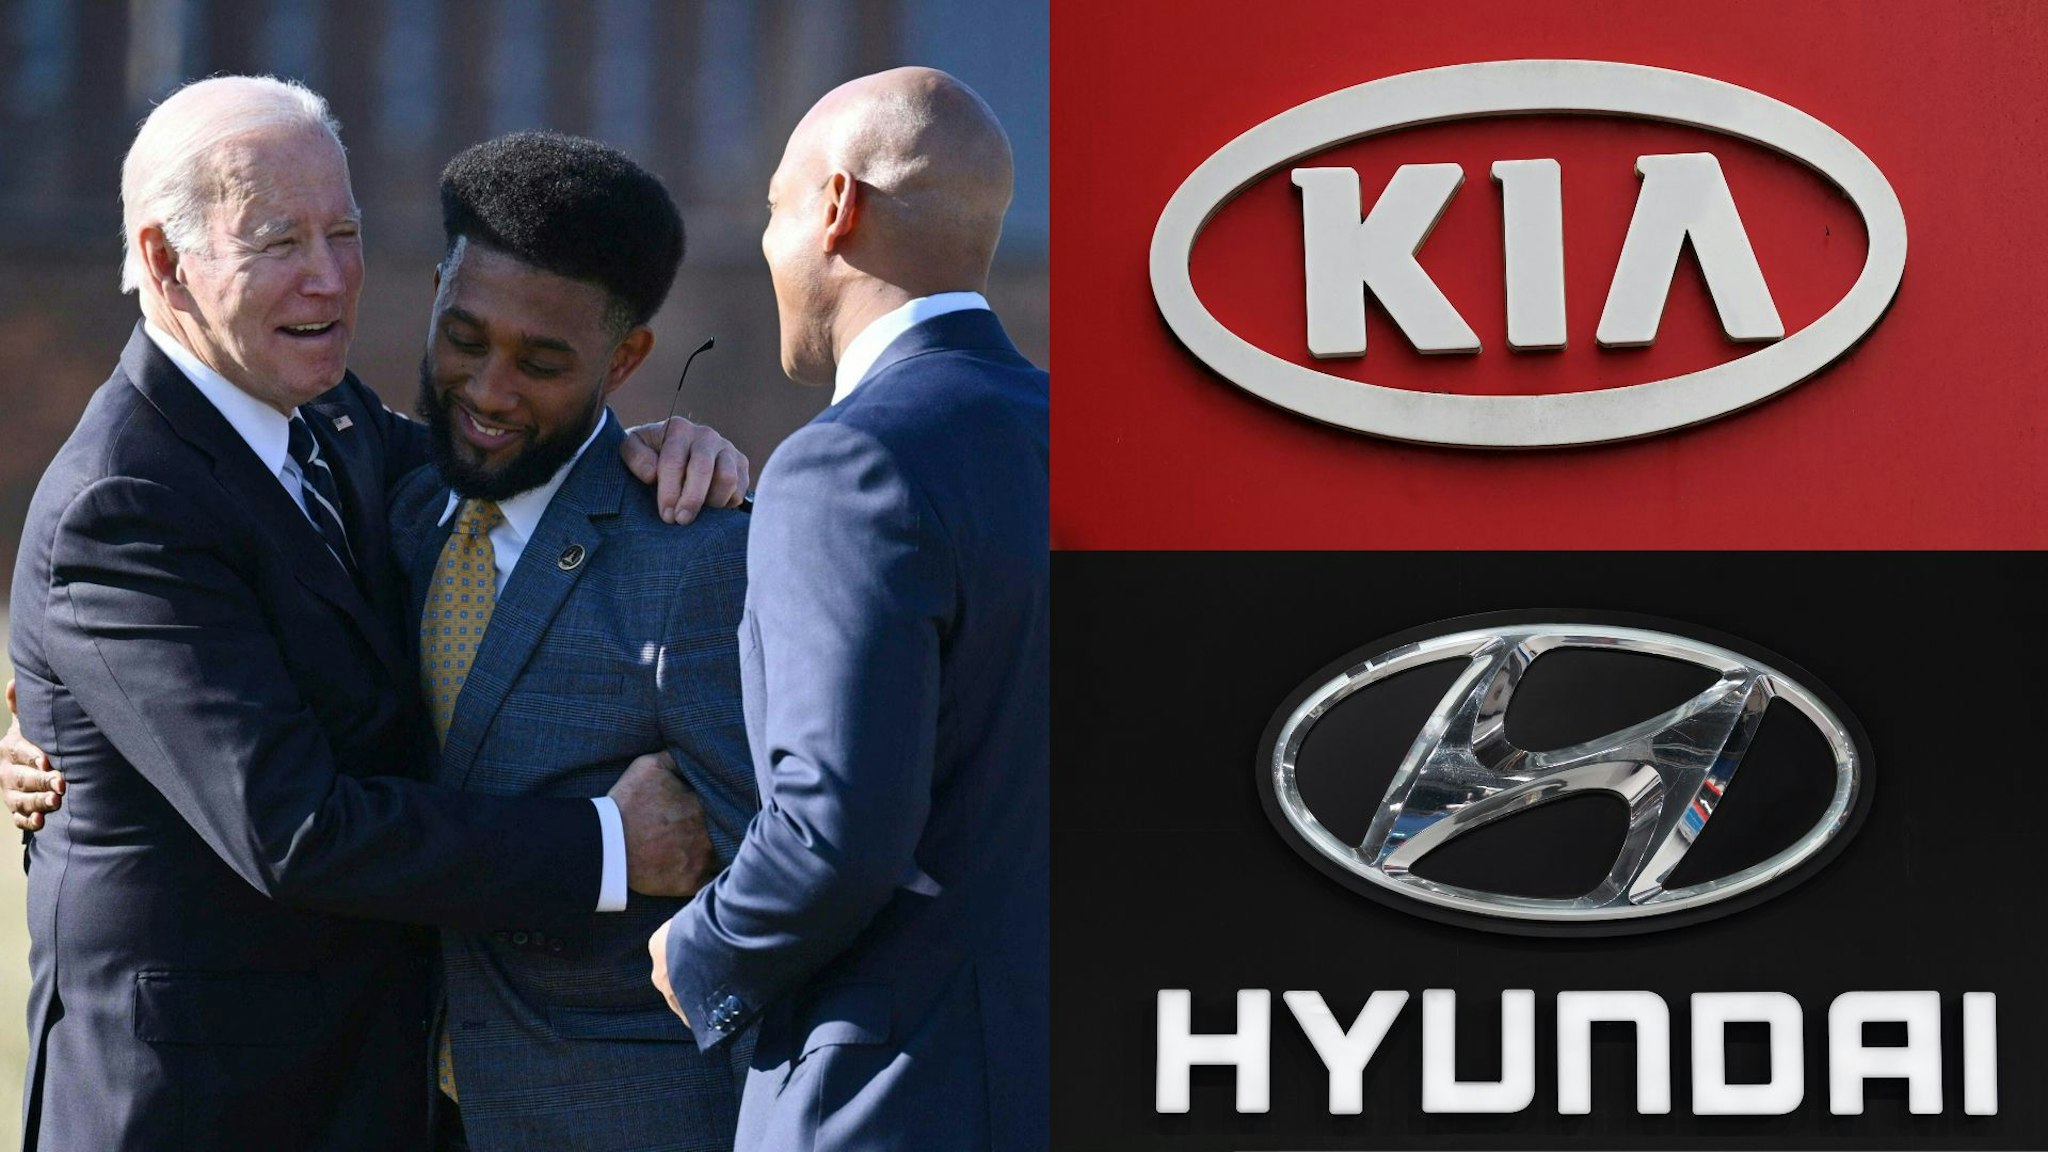 BARCELONA, SPAIN - MAY 12: Car Hyundai logo is seen at the Automobile Barcelona International Motor Show in Barcelona, Spain on May 12, 2023. US President Joe Biden (L) is greeted by Baltimore Mayor Brandon Scott (C) and Maryland Governor Wes Moore (R) upon arrival at Fort McHenry in Baltimore, Maryland on January 30, 2023. - Biden is in Baltimore to highlight funding from the infrastructure law. A picture taken on May 11, 2023 shows the logo of Korean automobile manufacturer KIA Motors Corporation near Lille, northern France.